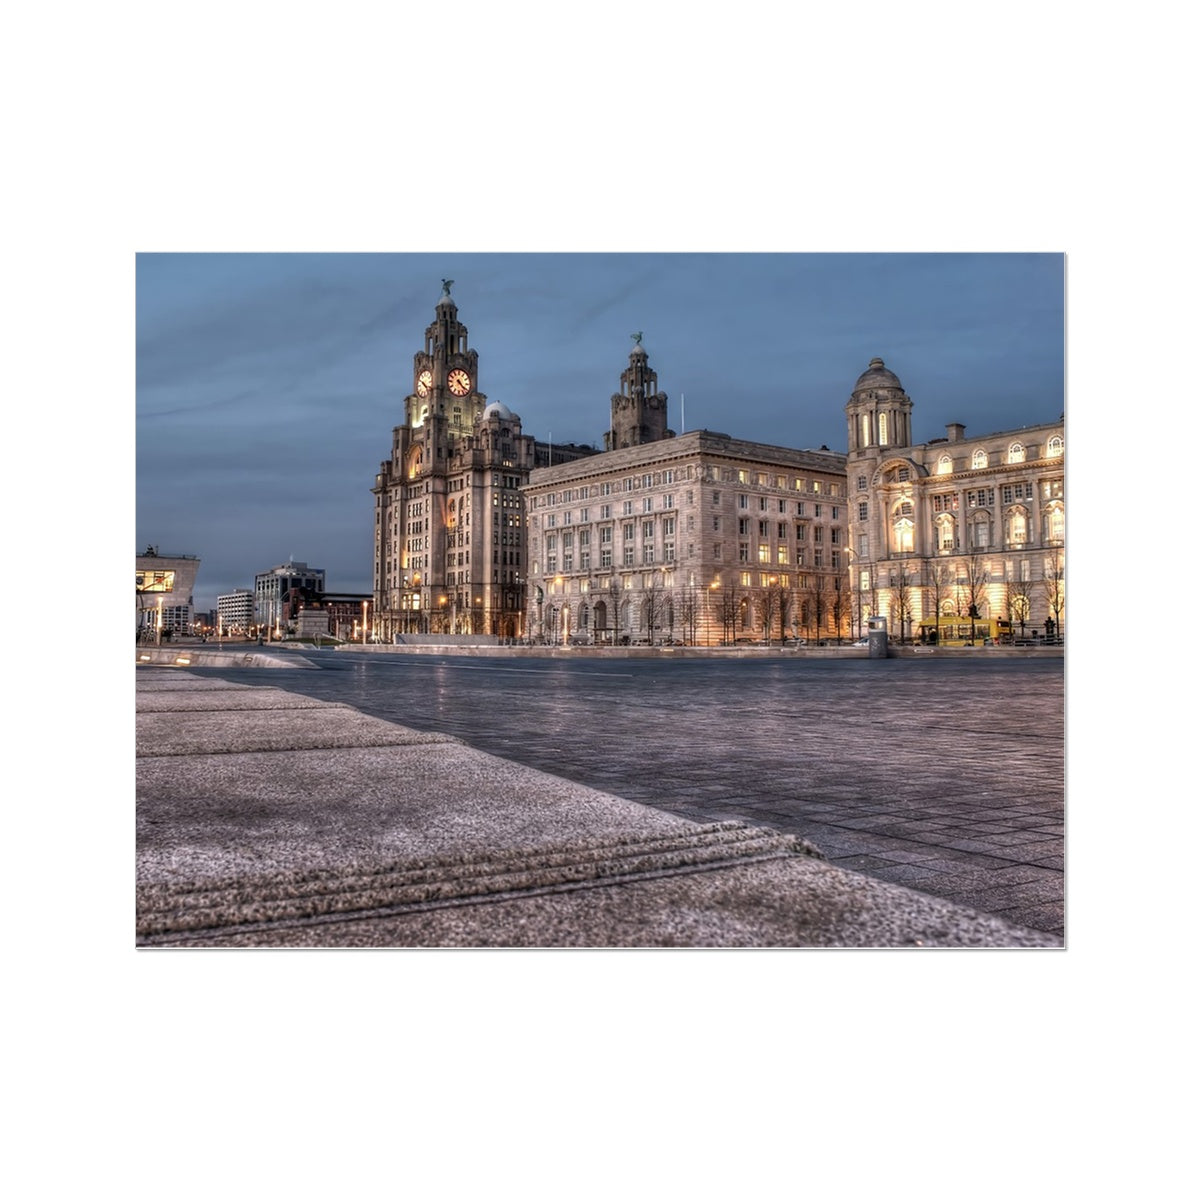 The Liver Buildings: A Liverpool Icon at Twilight Wall Art Poster